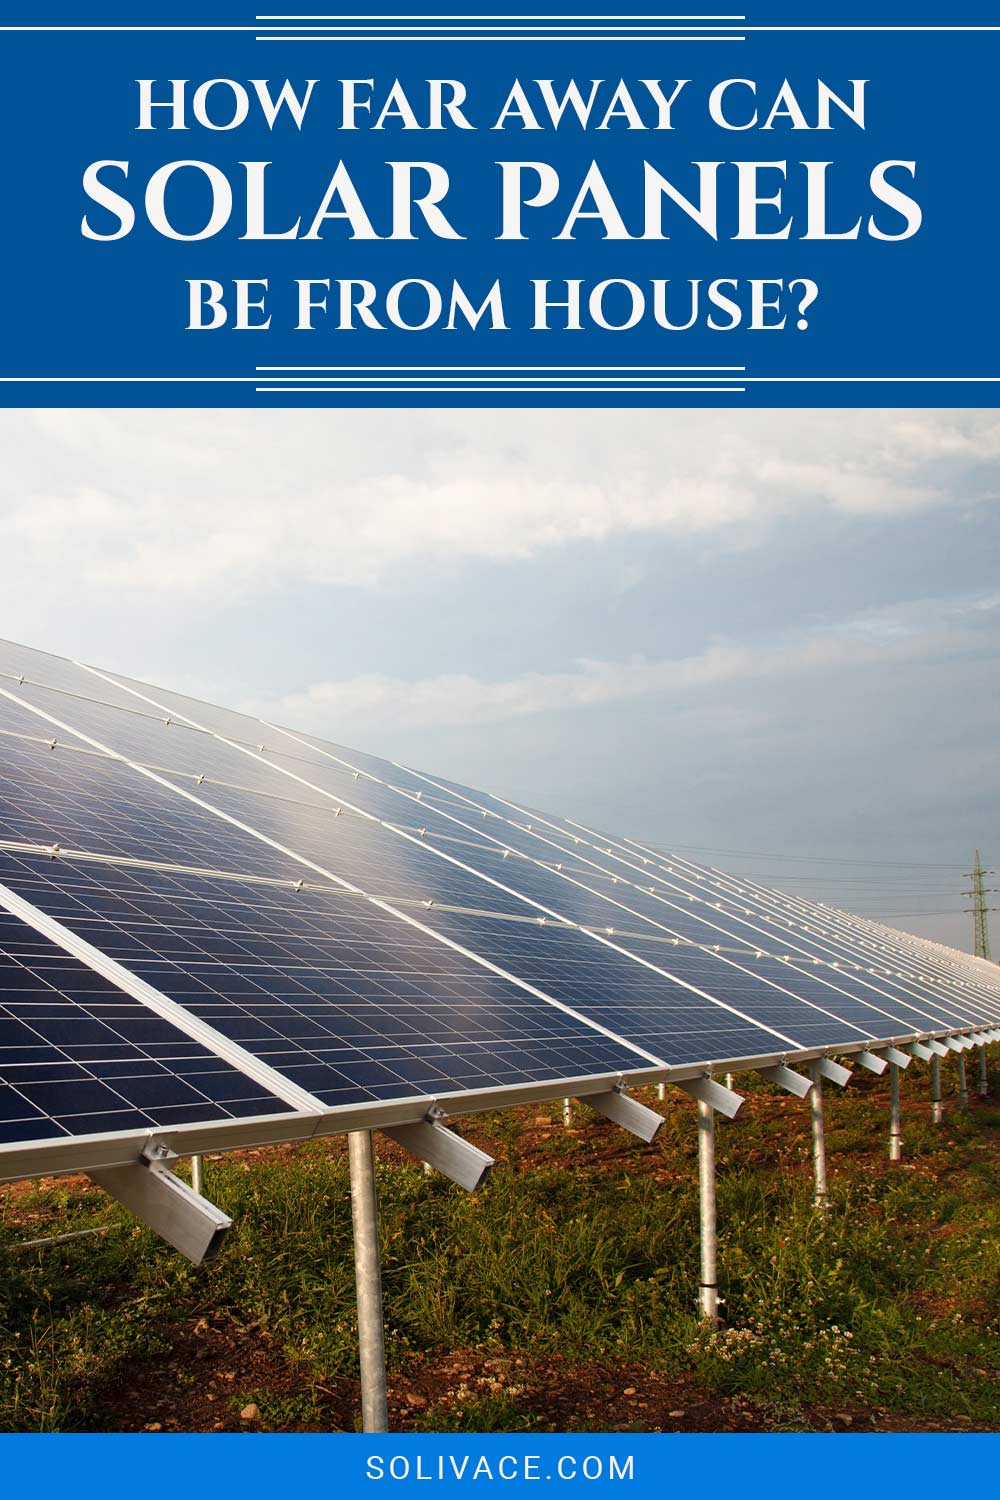 How Far Away Can Solar Panels Be From House?